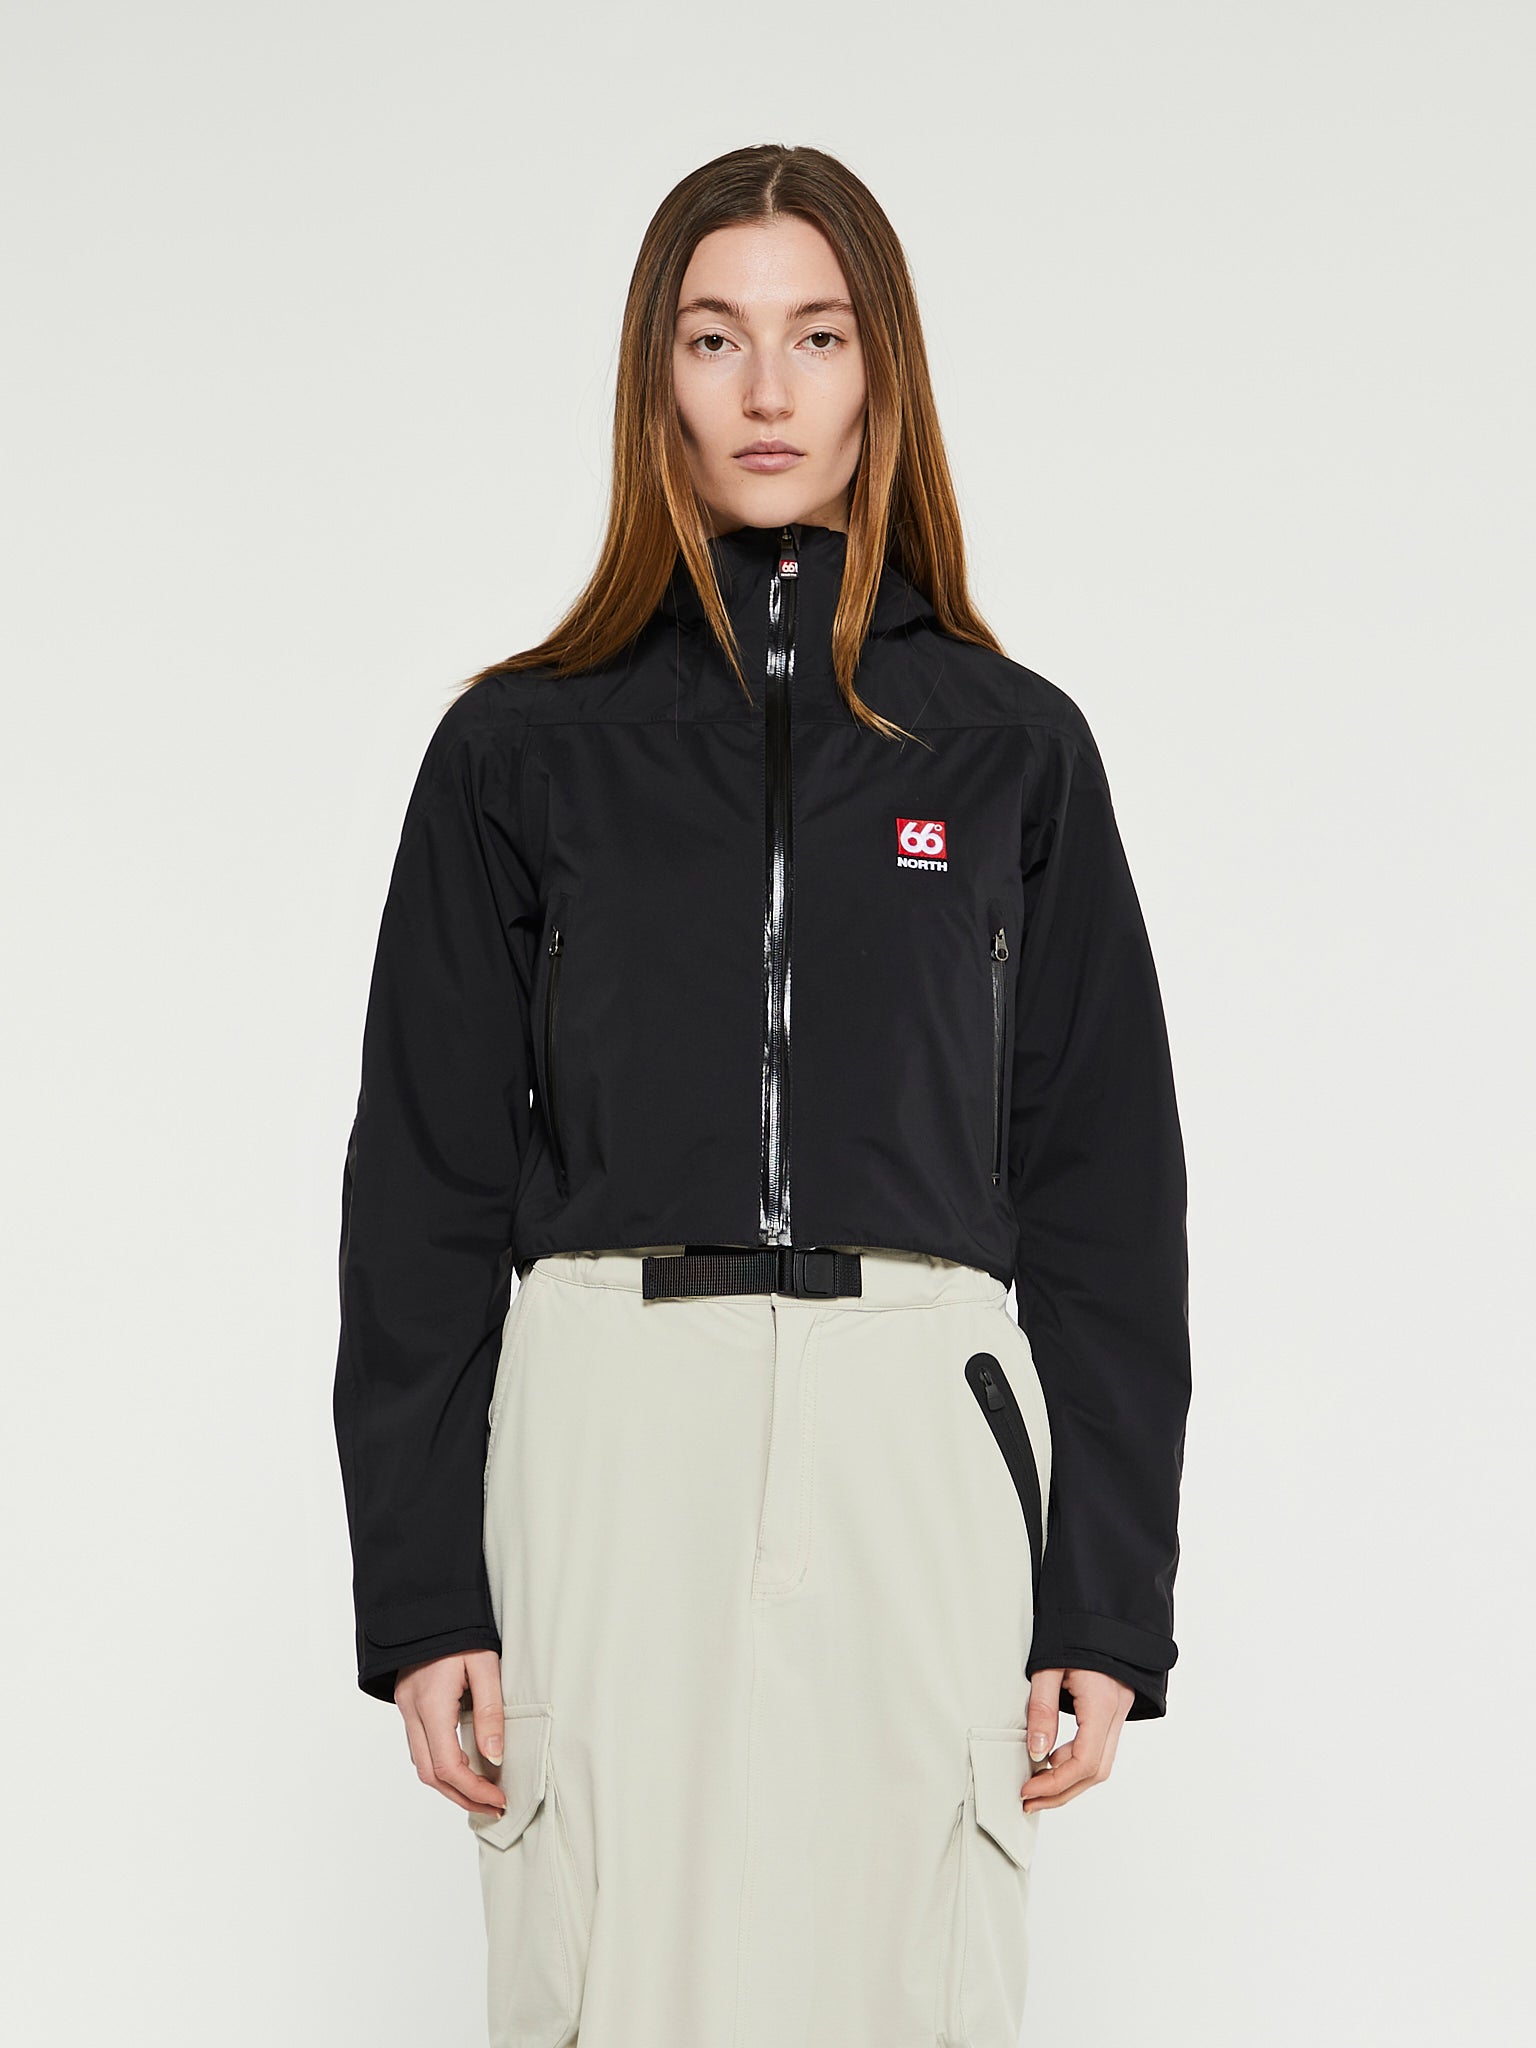 66North - Snaefell W Cropped Neoshell Jacket in Black